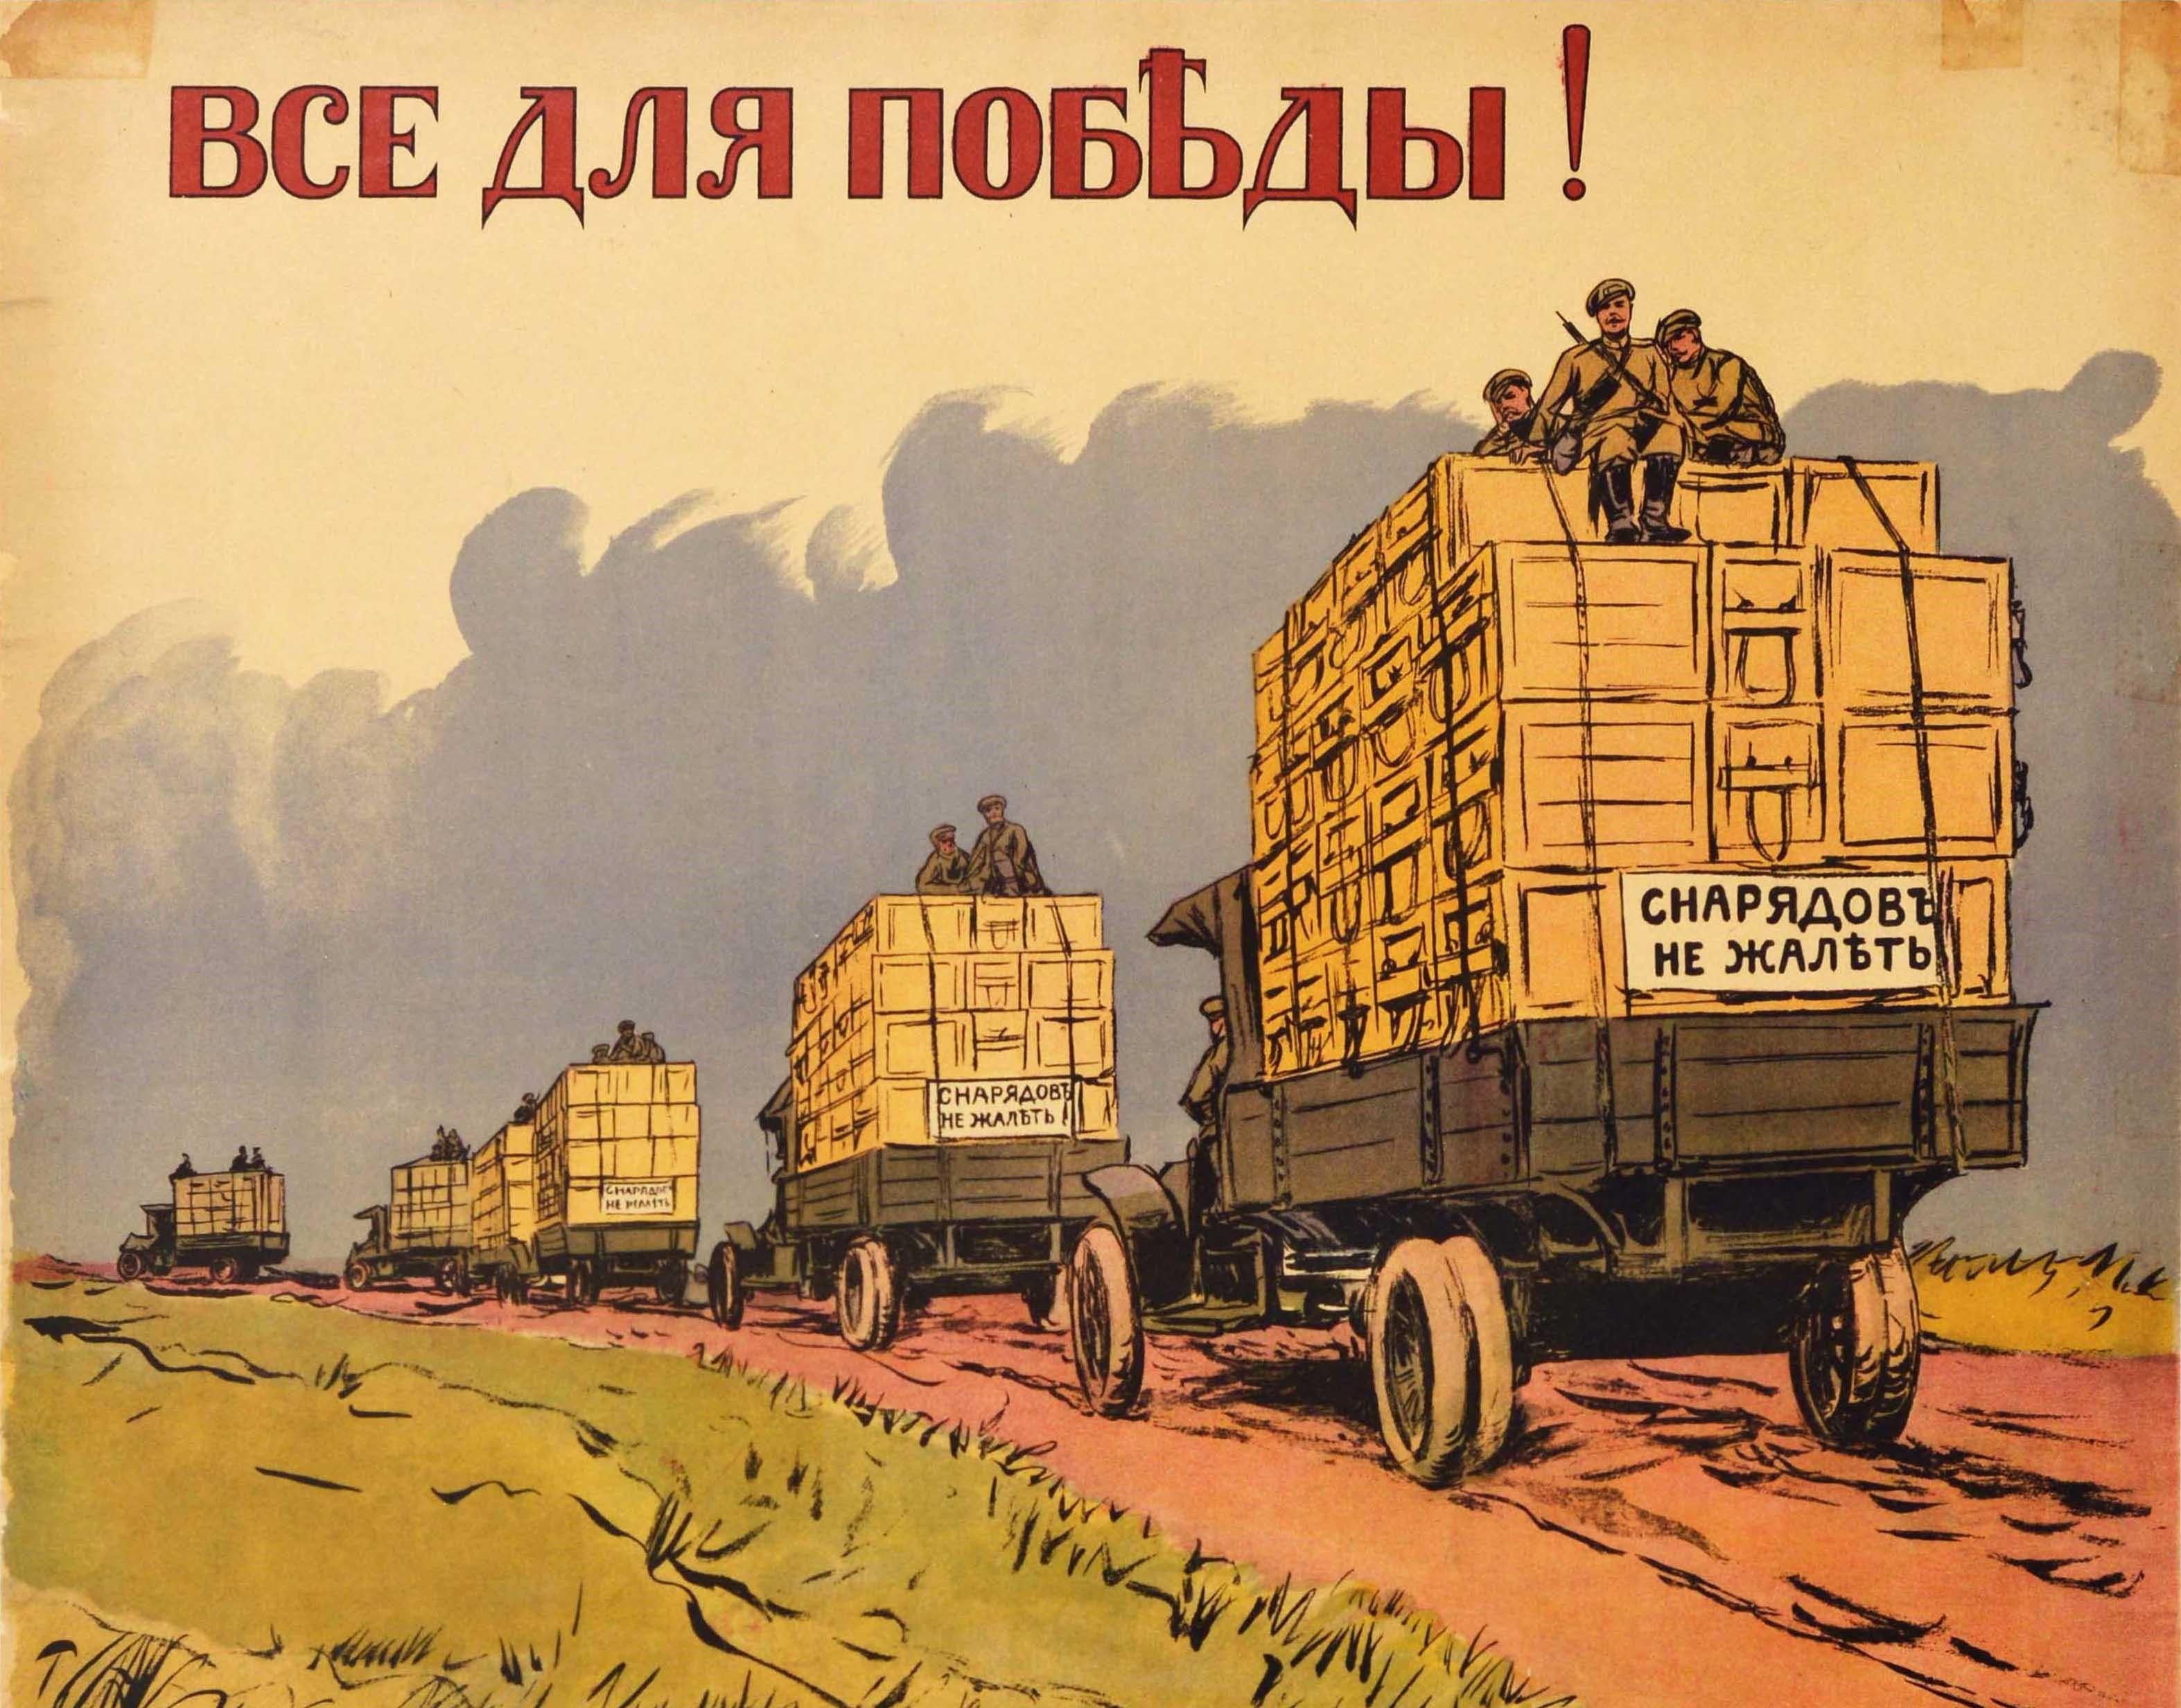 Original antique World War One war loan poster - Everything for Victory Buy Military Loan 5½% / ??? ??? ??????! ????????????? ?? ??????? ???? 5½% - featuring a convoy of military trucks transporting crates along a track road in the countryside with